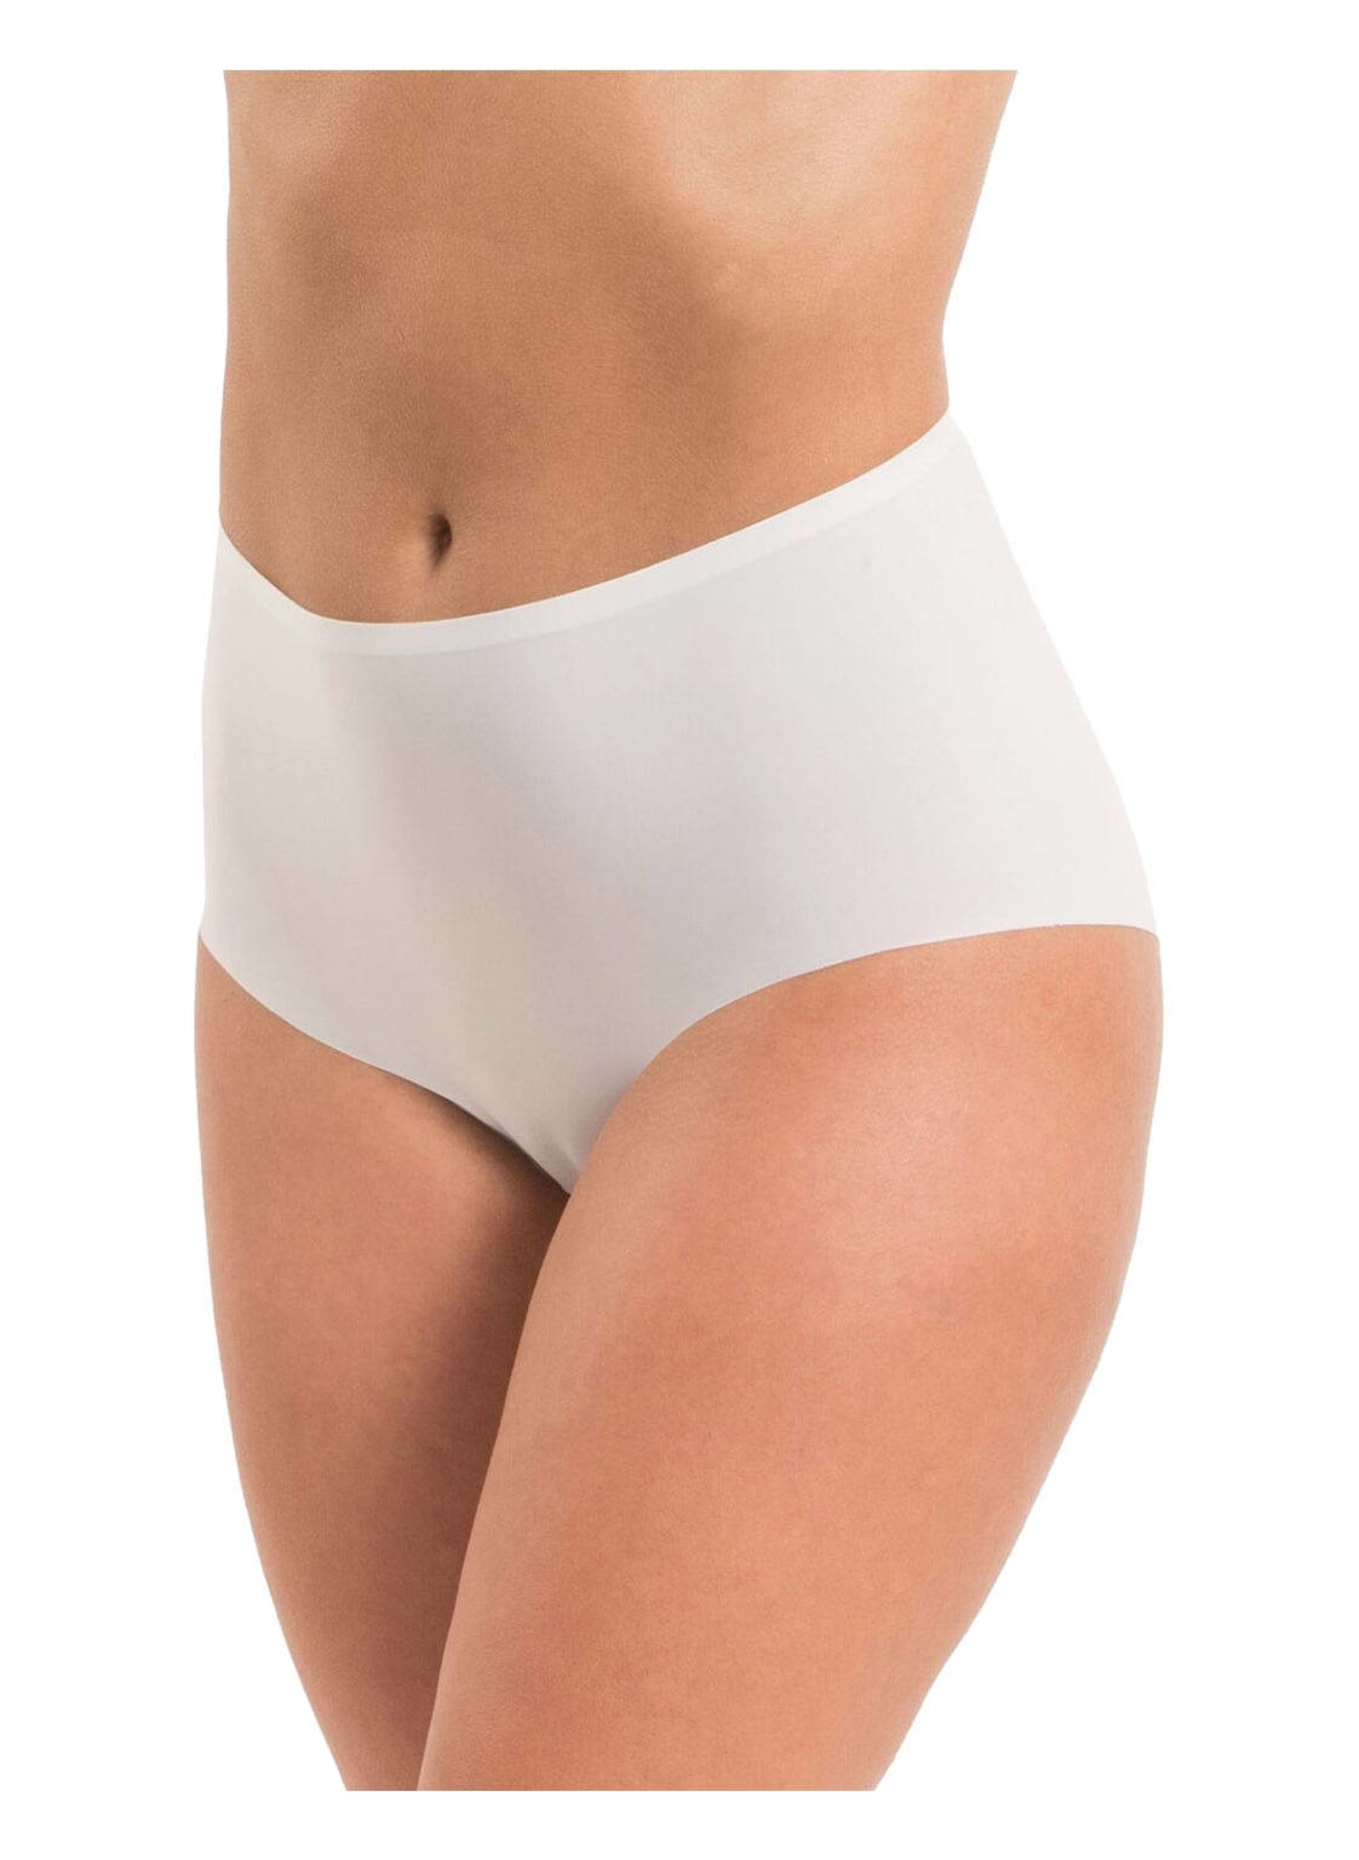 MAGIC Bodyfashion 2-pack panties DREAM INVISIBLES, Color: WHITE (Image 4)